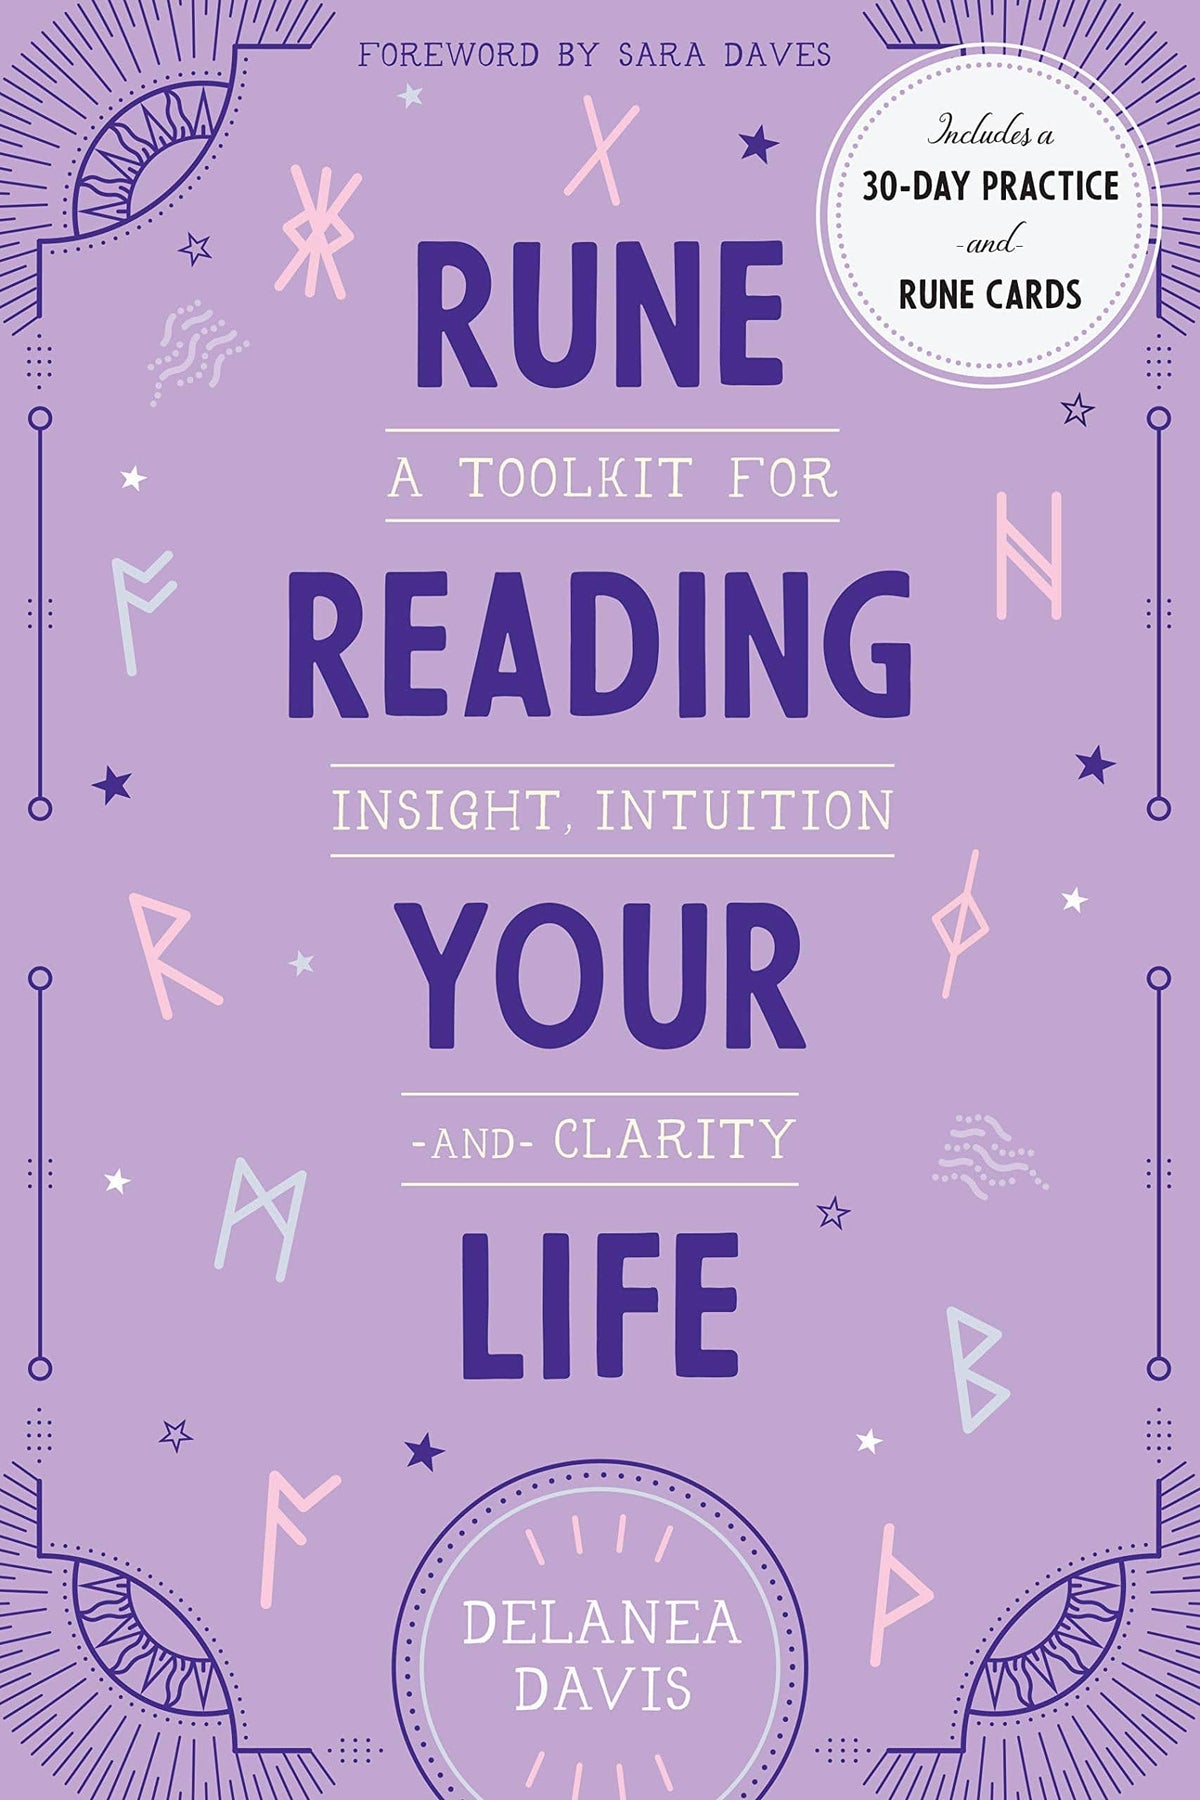 Rune Reading Your Life: Toolkit for Insight, Intuition, and Clarity - Third Eye